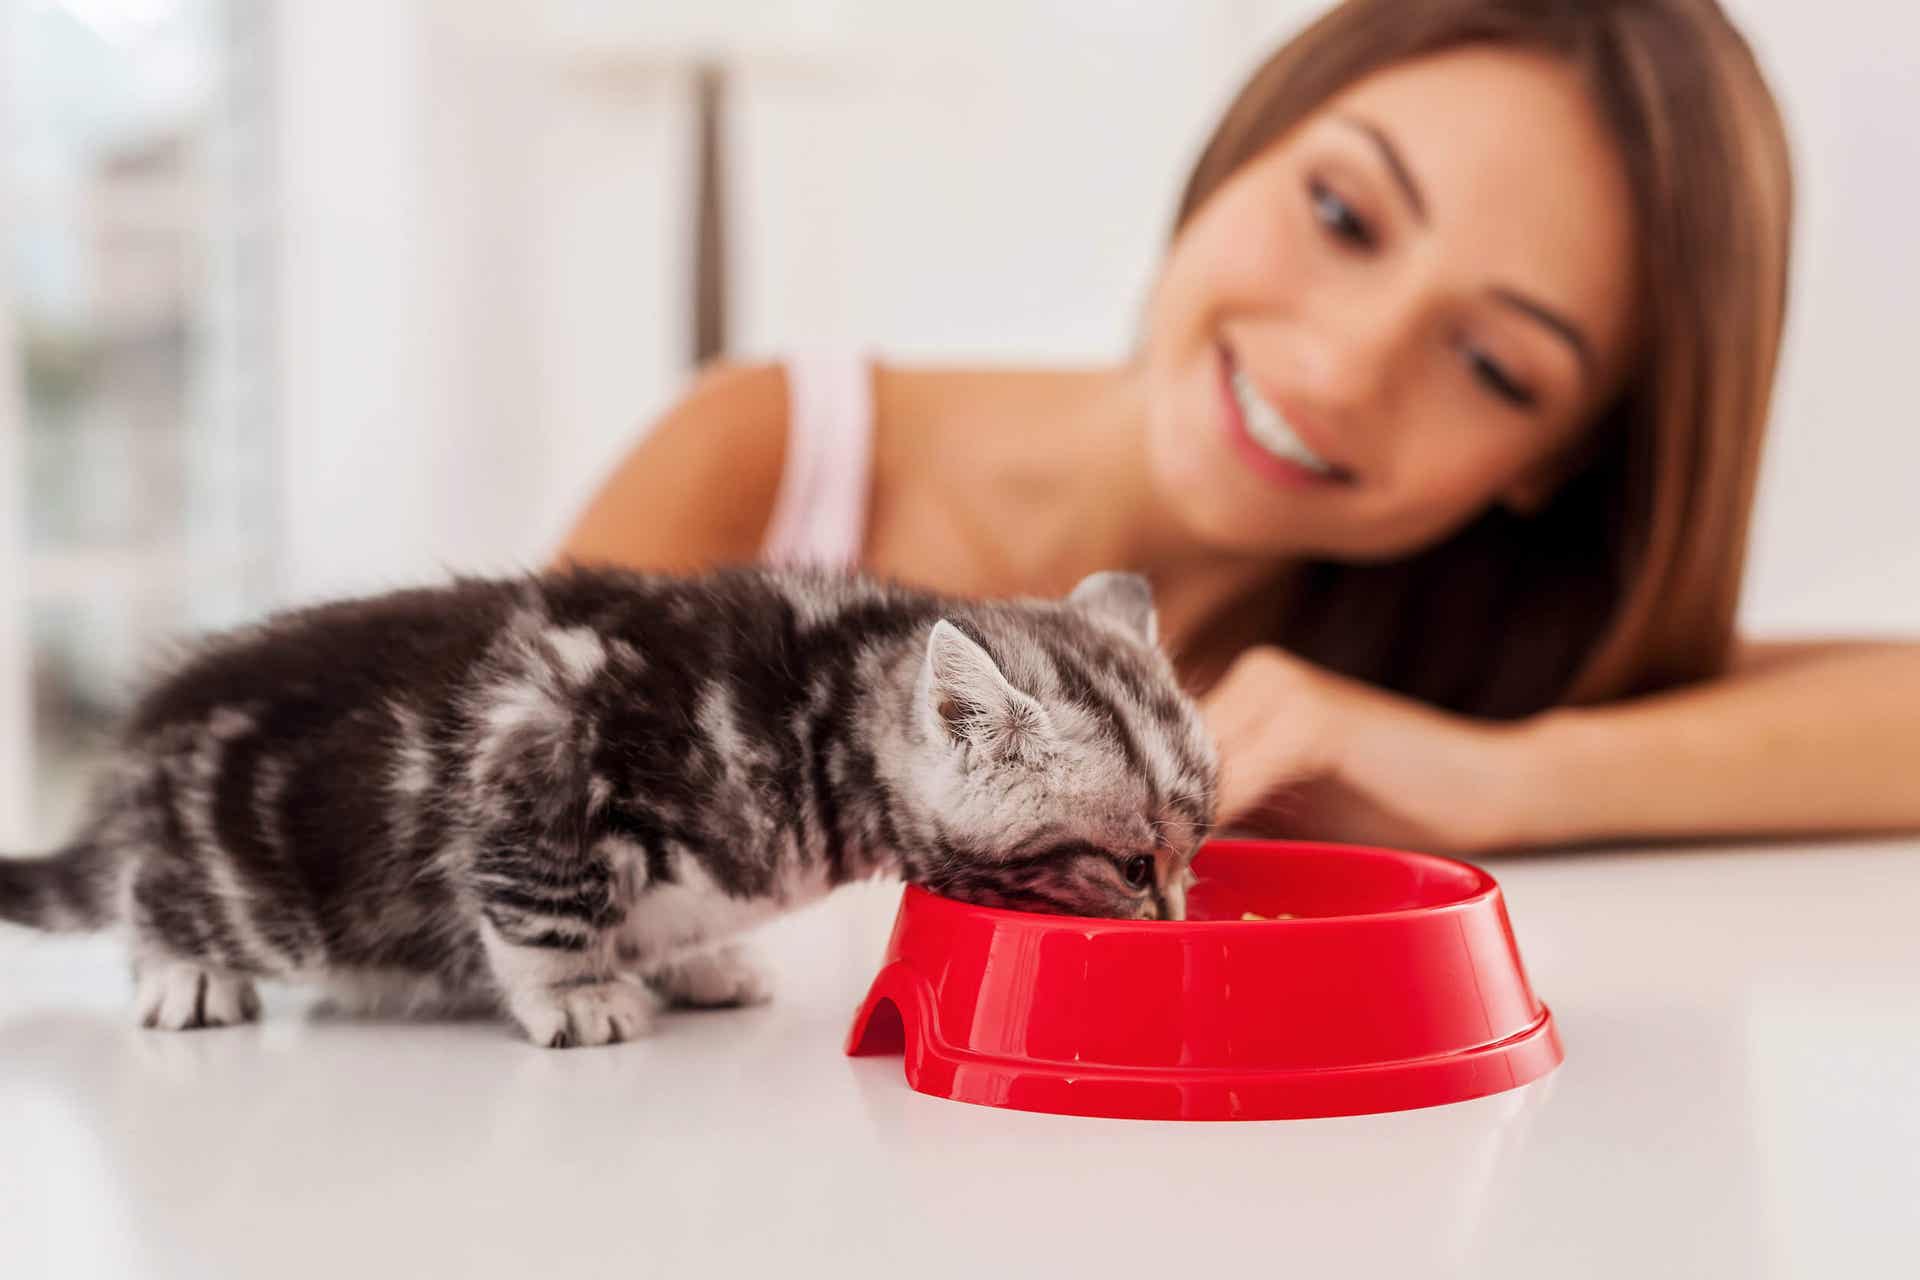 A woman feeding a kitten: Cat therapy